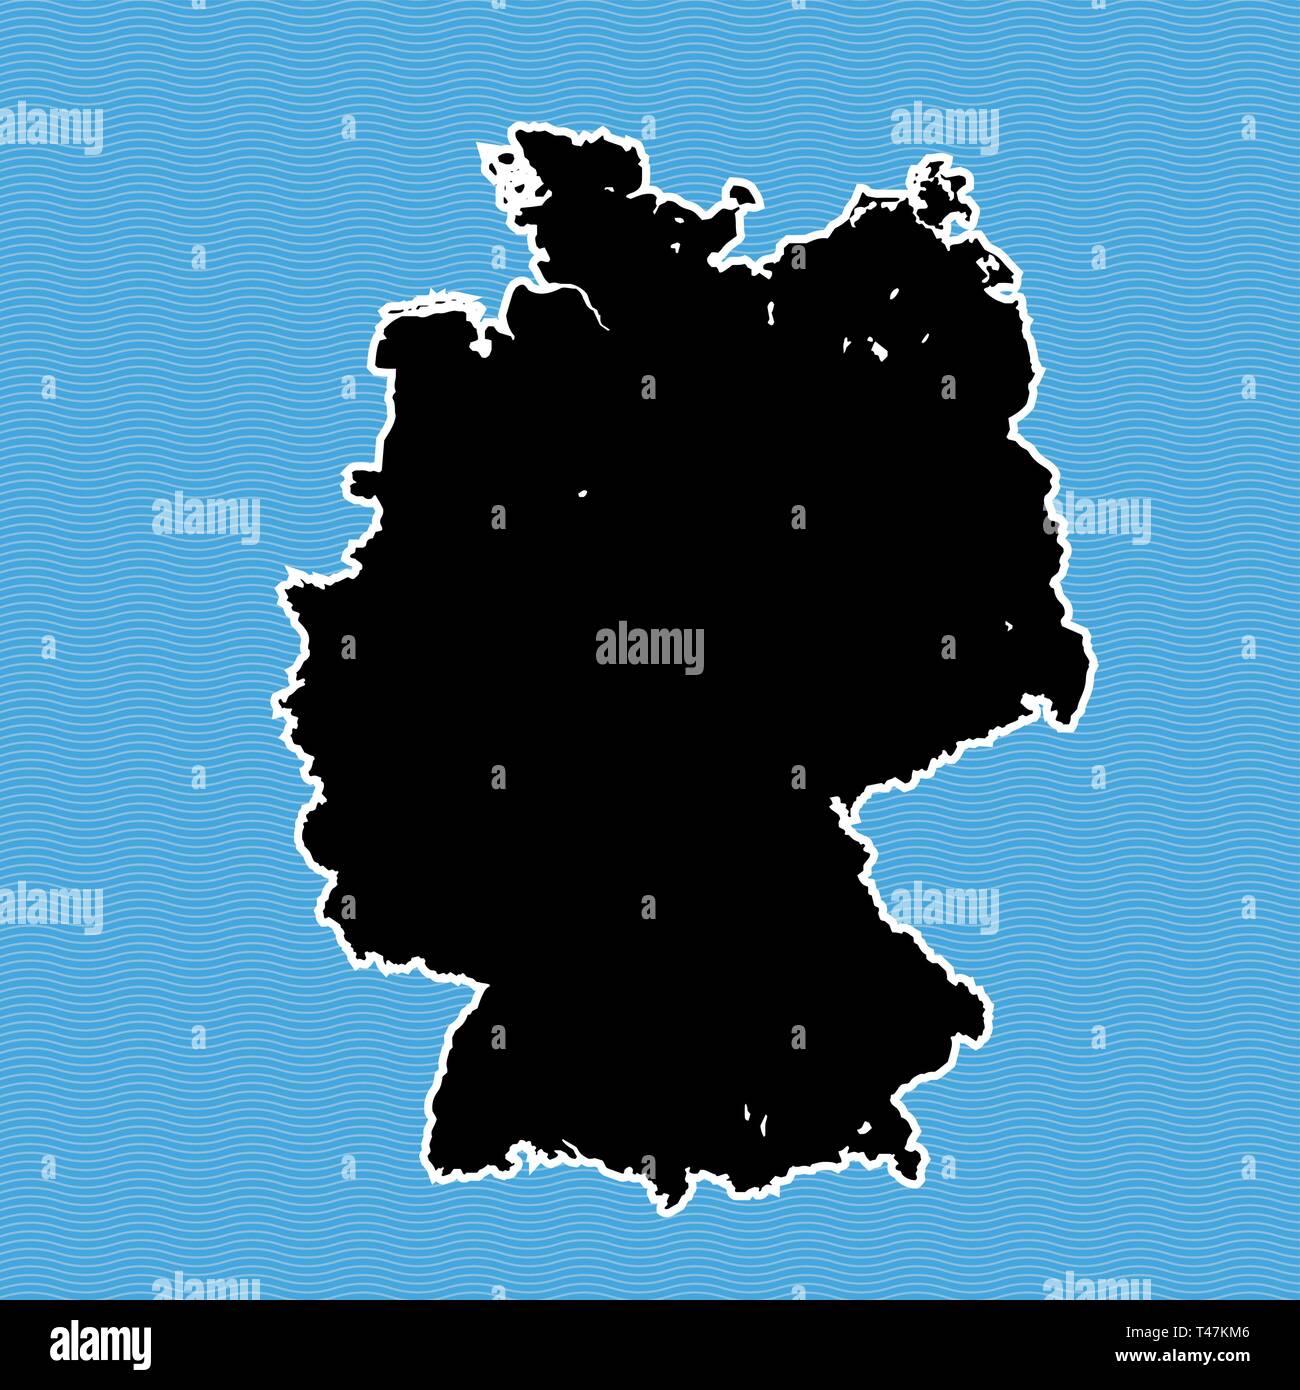 Germany map as island. Map separated on blue wave water background. Stock Vector